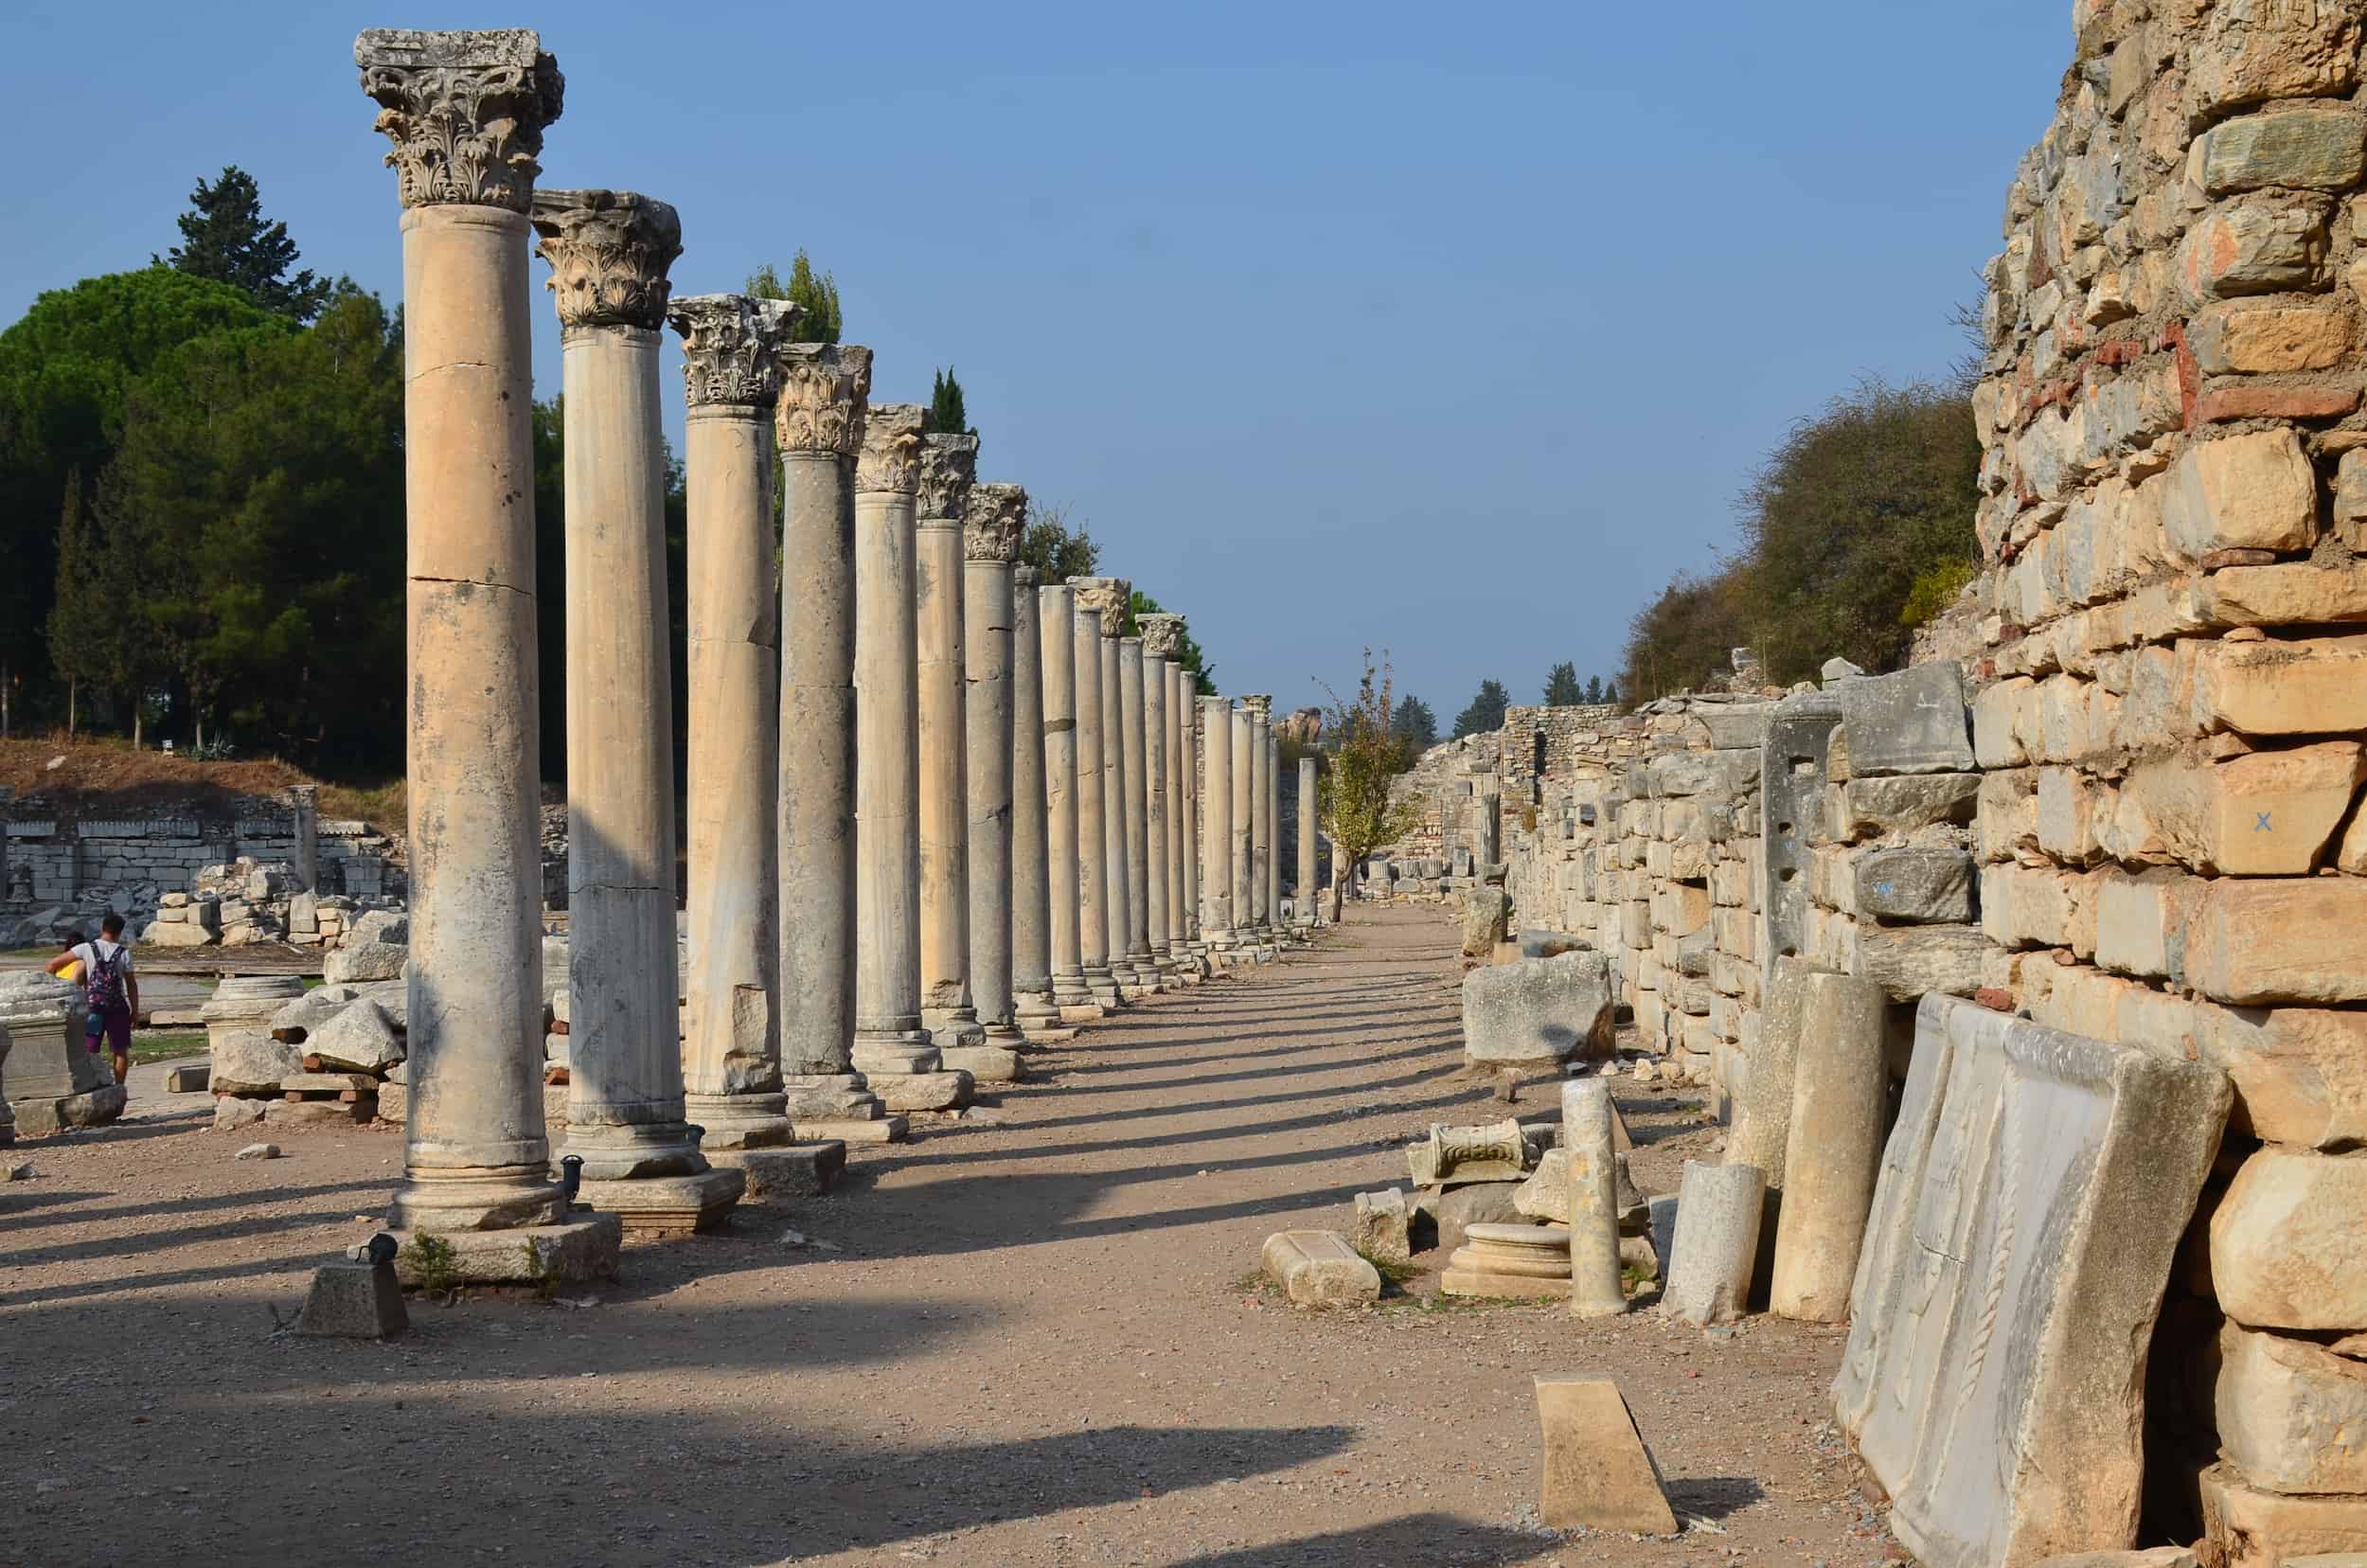 Looking north along the east side in the Commercial Agora in Ephesus